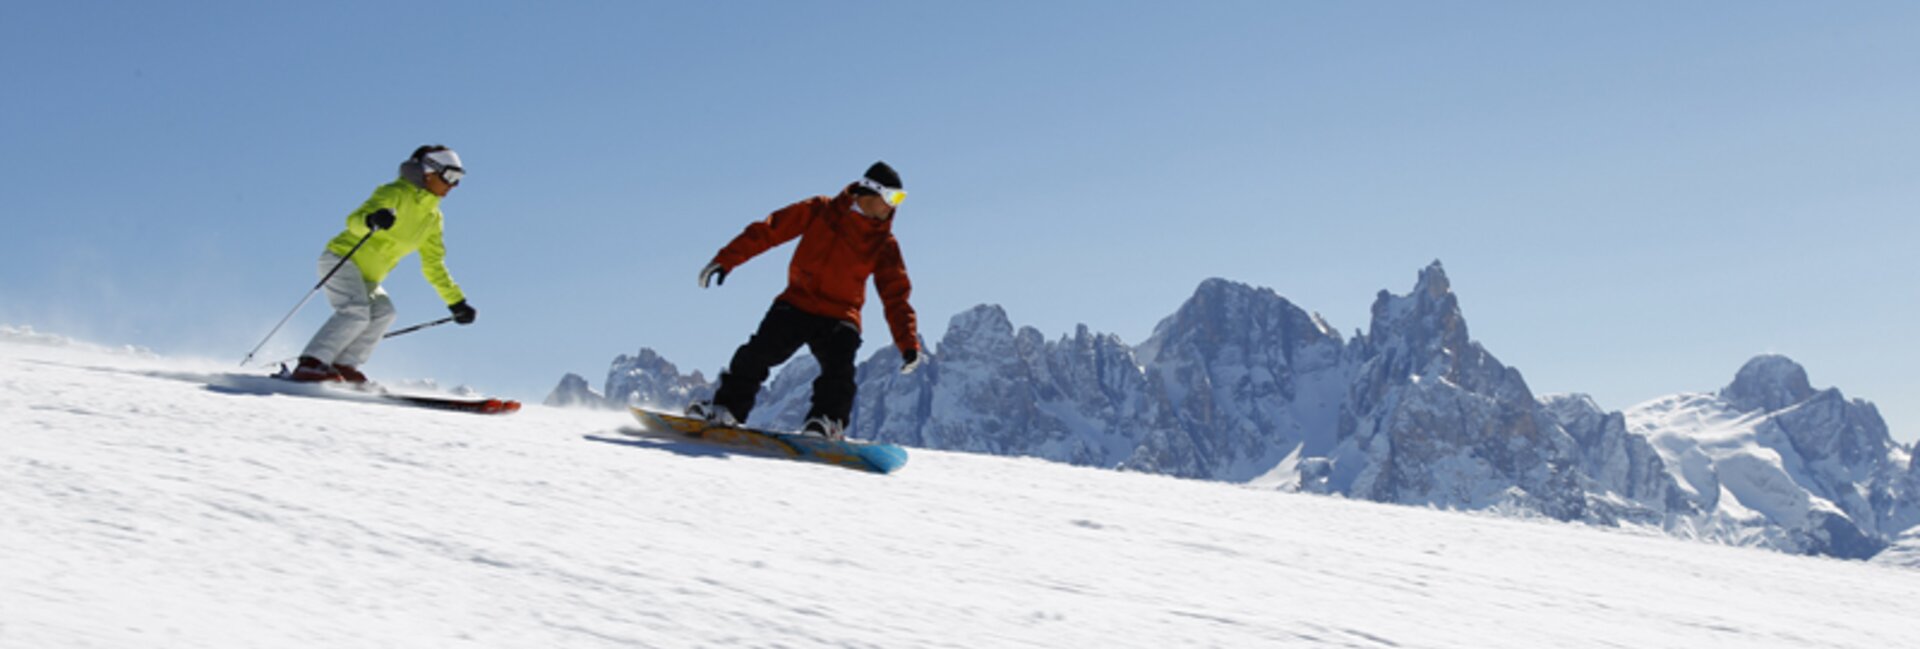 Alpe Lusia is the perfect area for skiing in the italian Alps